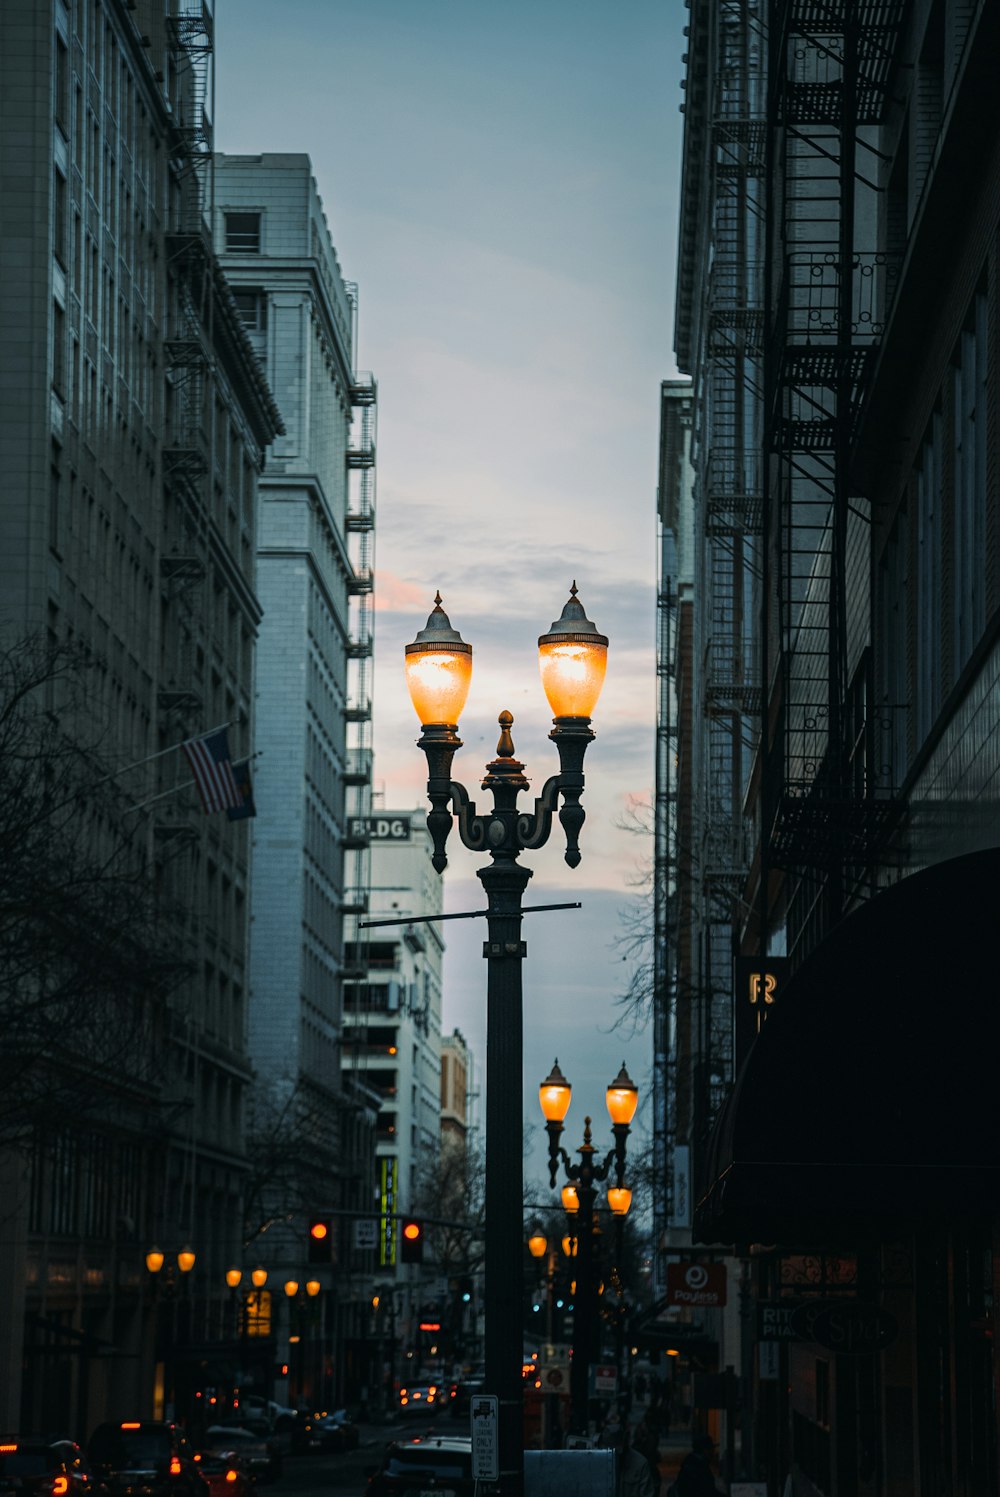 a street light in the middle of a city